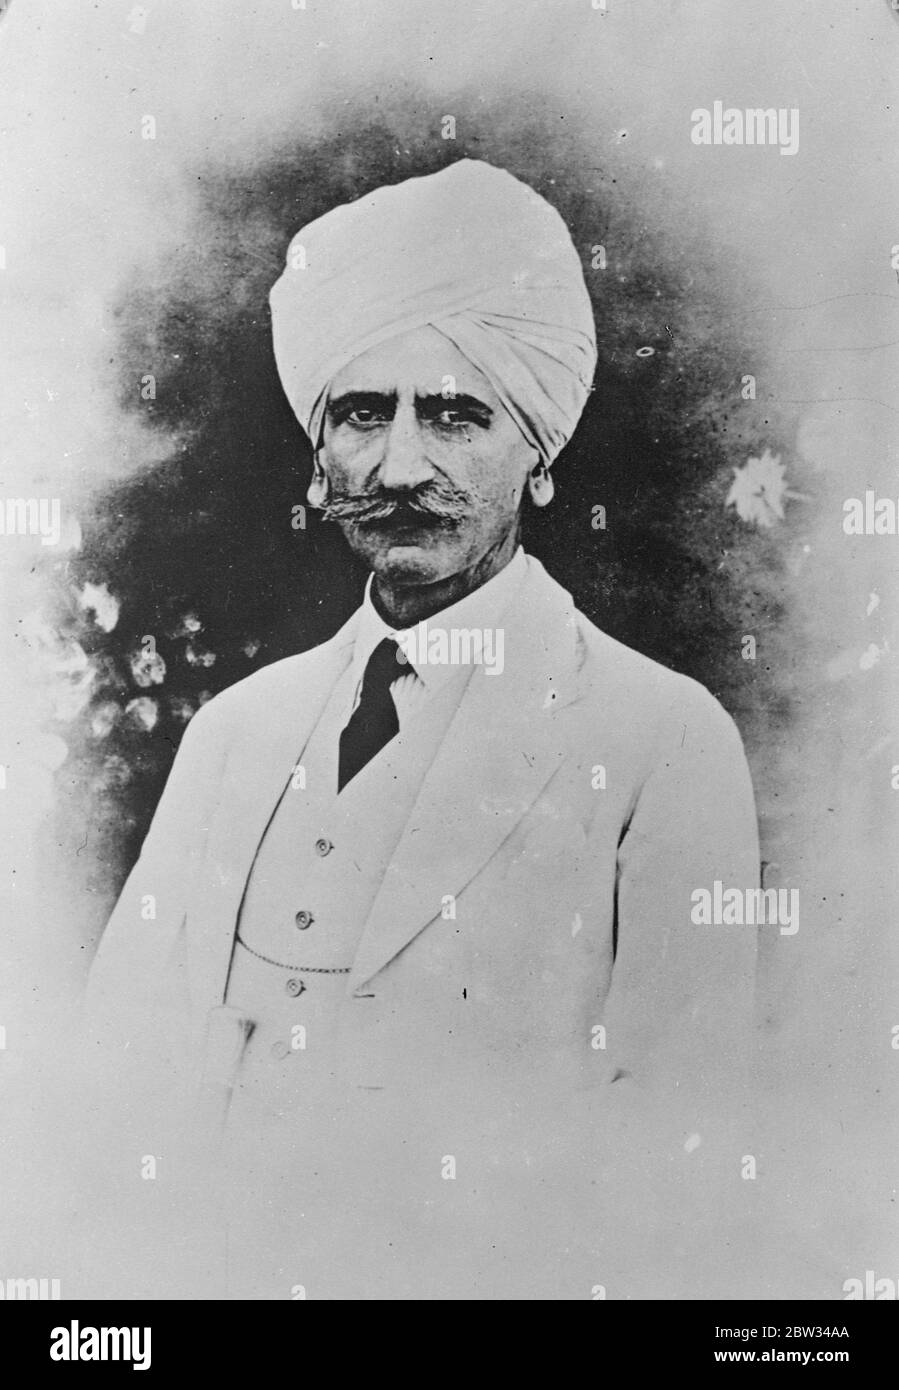 Prime Minister of kashmir resigns . Sir Harold Kisham Kane , the Prime Minister of Kashmir , is resigning on account of extreme ill health and old age . Kashmir has for some time had attention focussed on it on account of the trouble there which necessitated the Maharaja of Kashmir calling in the air of British troops . Sir Hari Kisham Kane , the retiring Prime Minister of Kashmir . 15 March 1932 Stock Photo